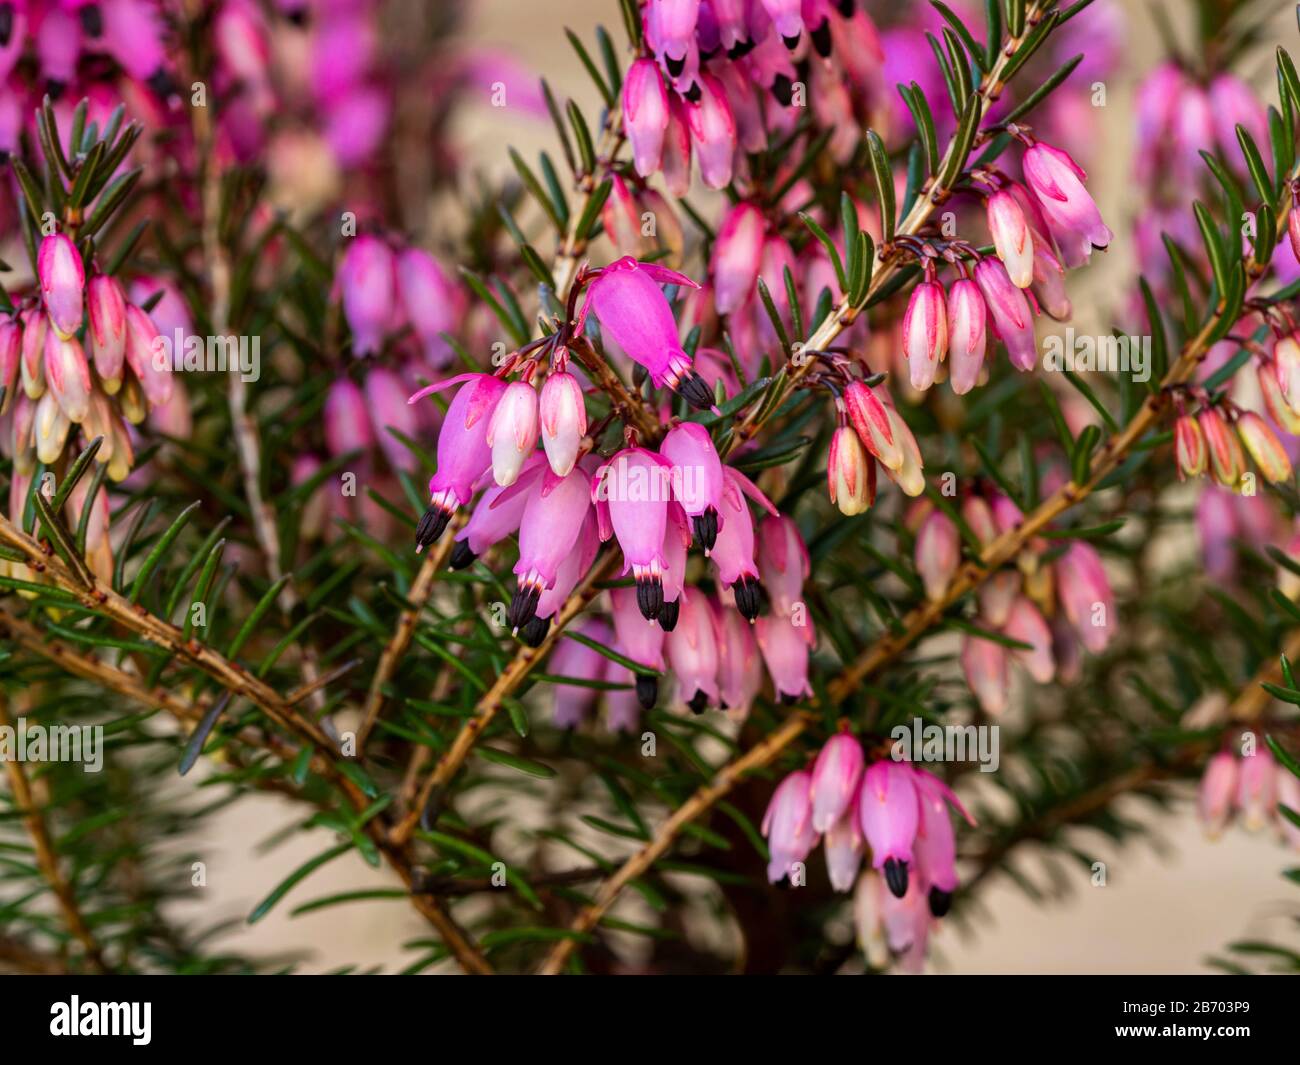 Closeup of the pink flowers, buds and green leaves of the heather Erica carnea variety Winter Sun Stock Photo